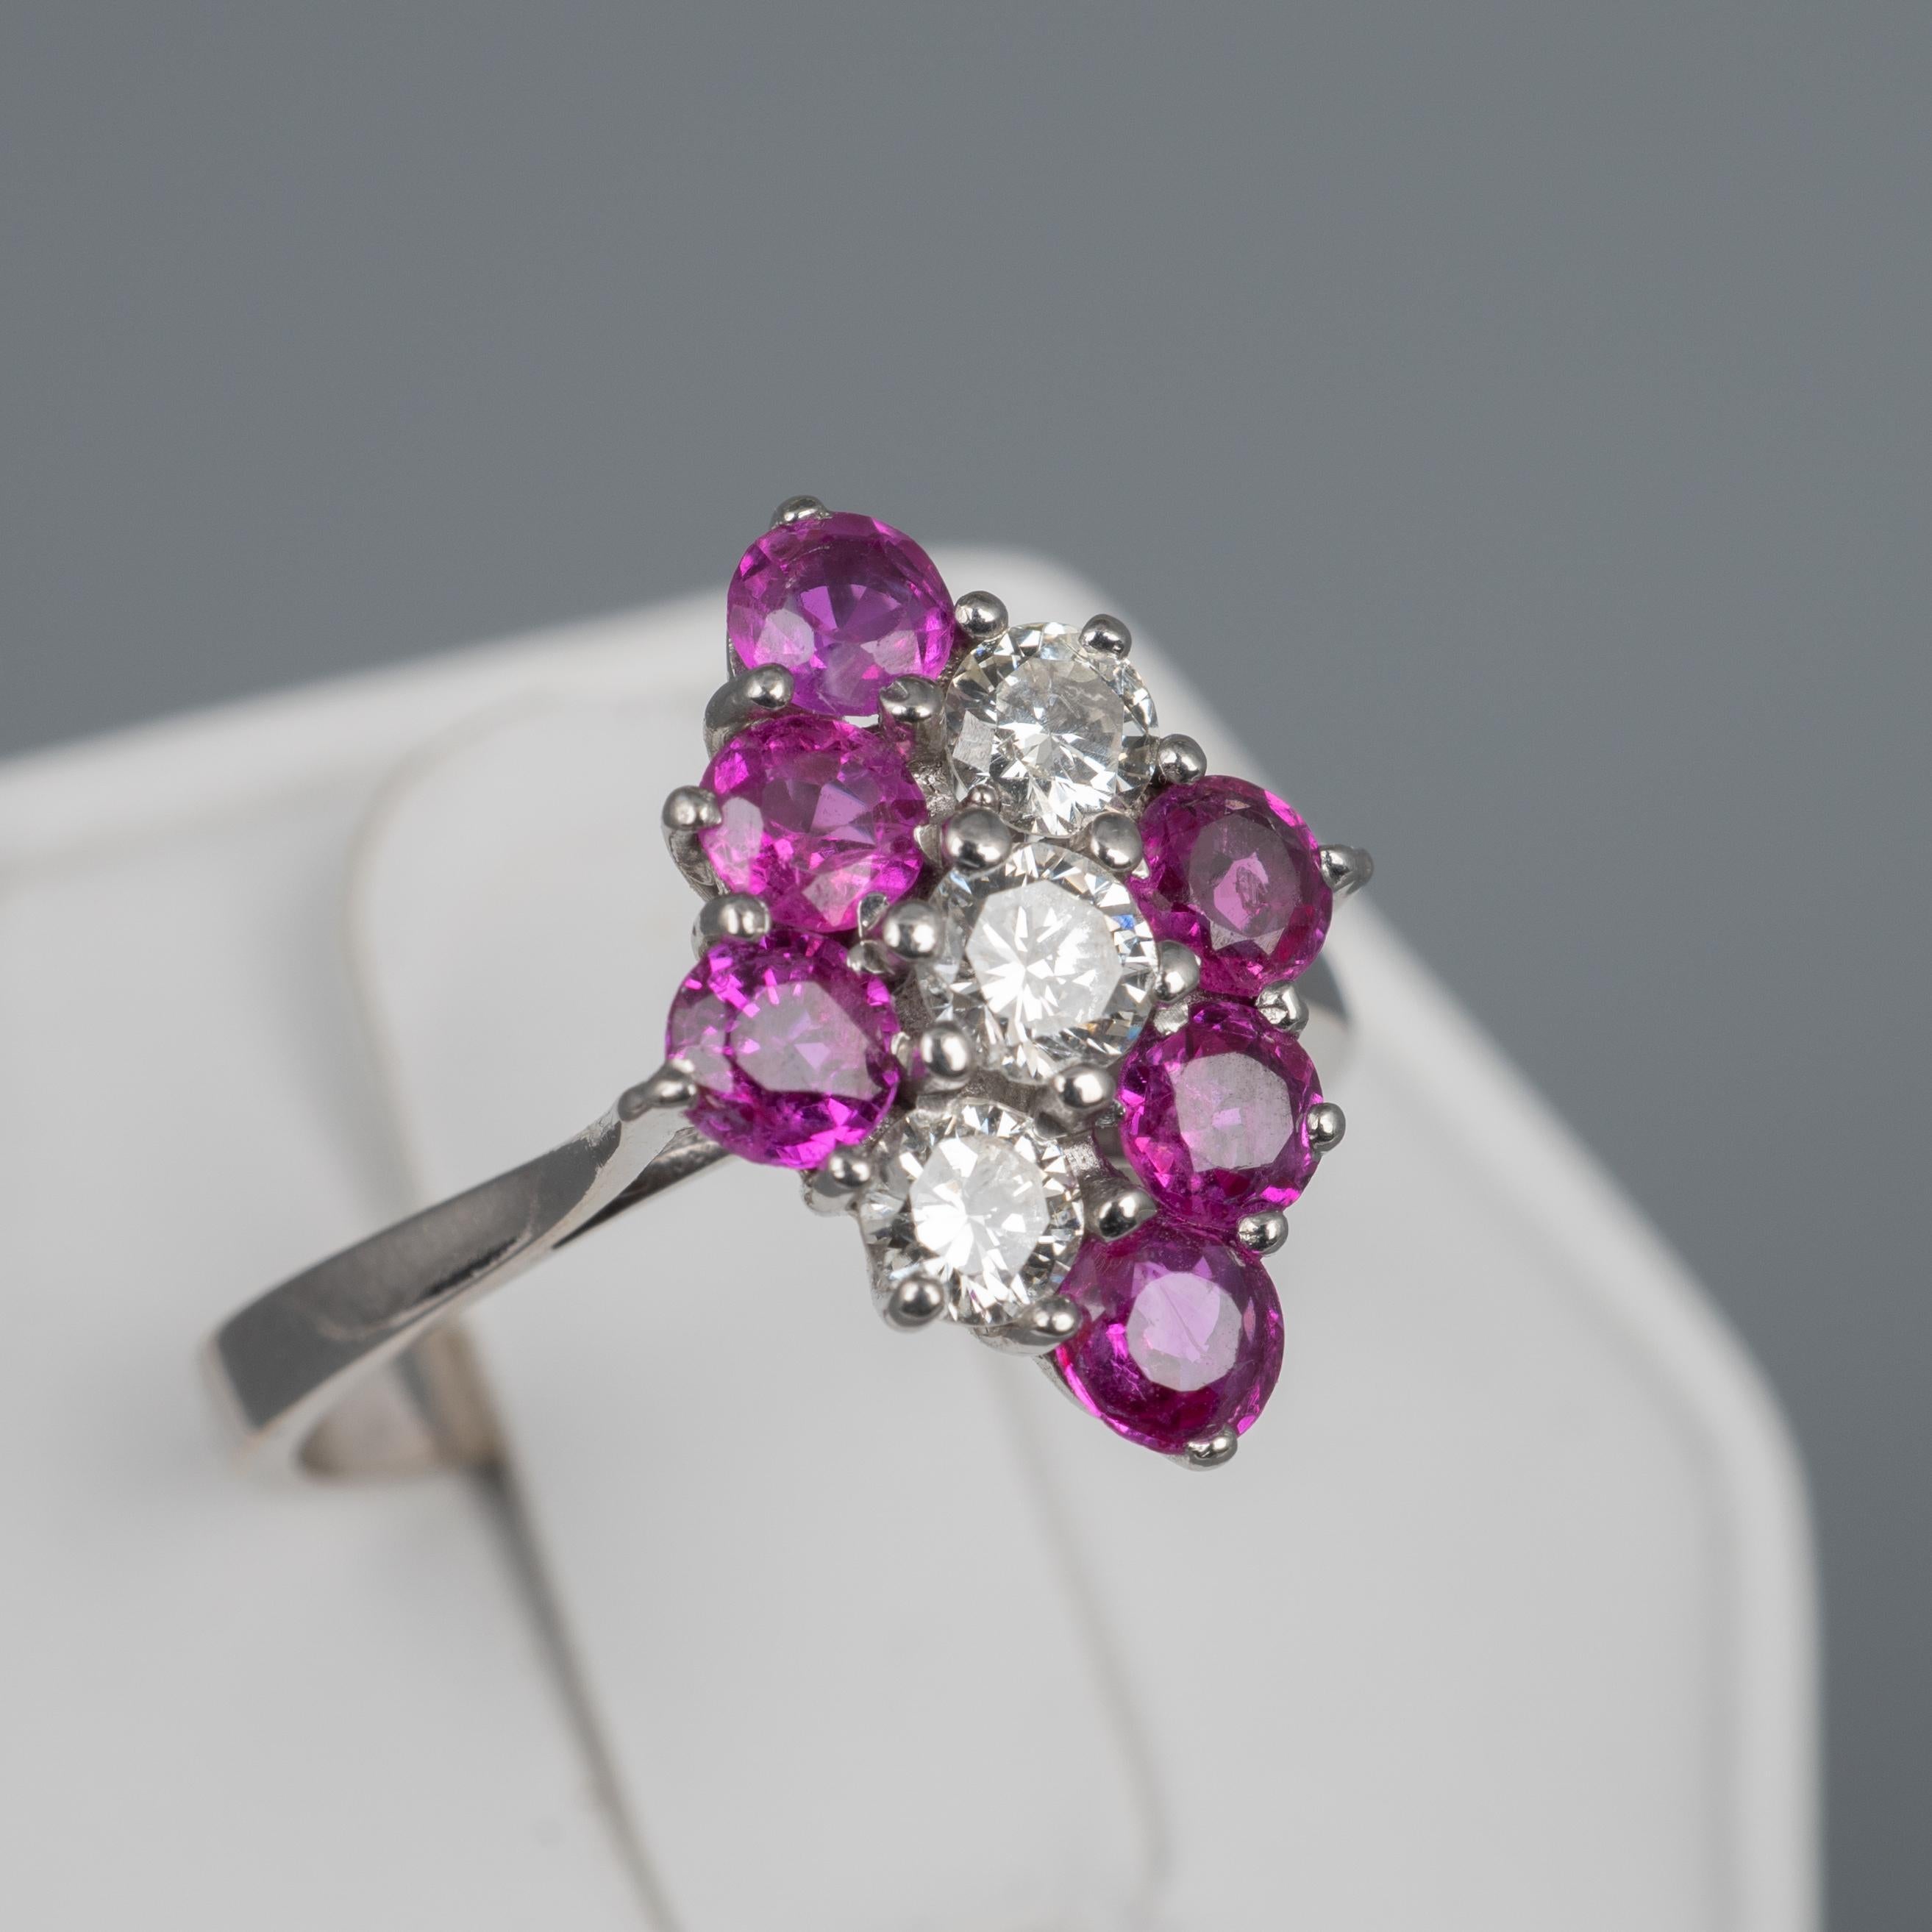 This gorgeous natural pink Ruby and Diamond ring is beautifully crafted in 18k white gold and features 1.3 carats of sparkling gemstones neatly arranged into a diamond shape cluster.

The setting features a row of three round cut diamonds totalling